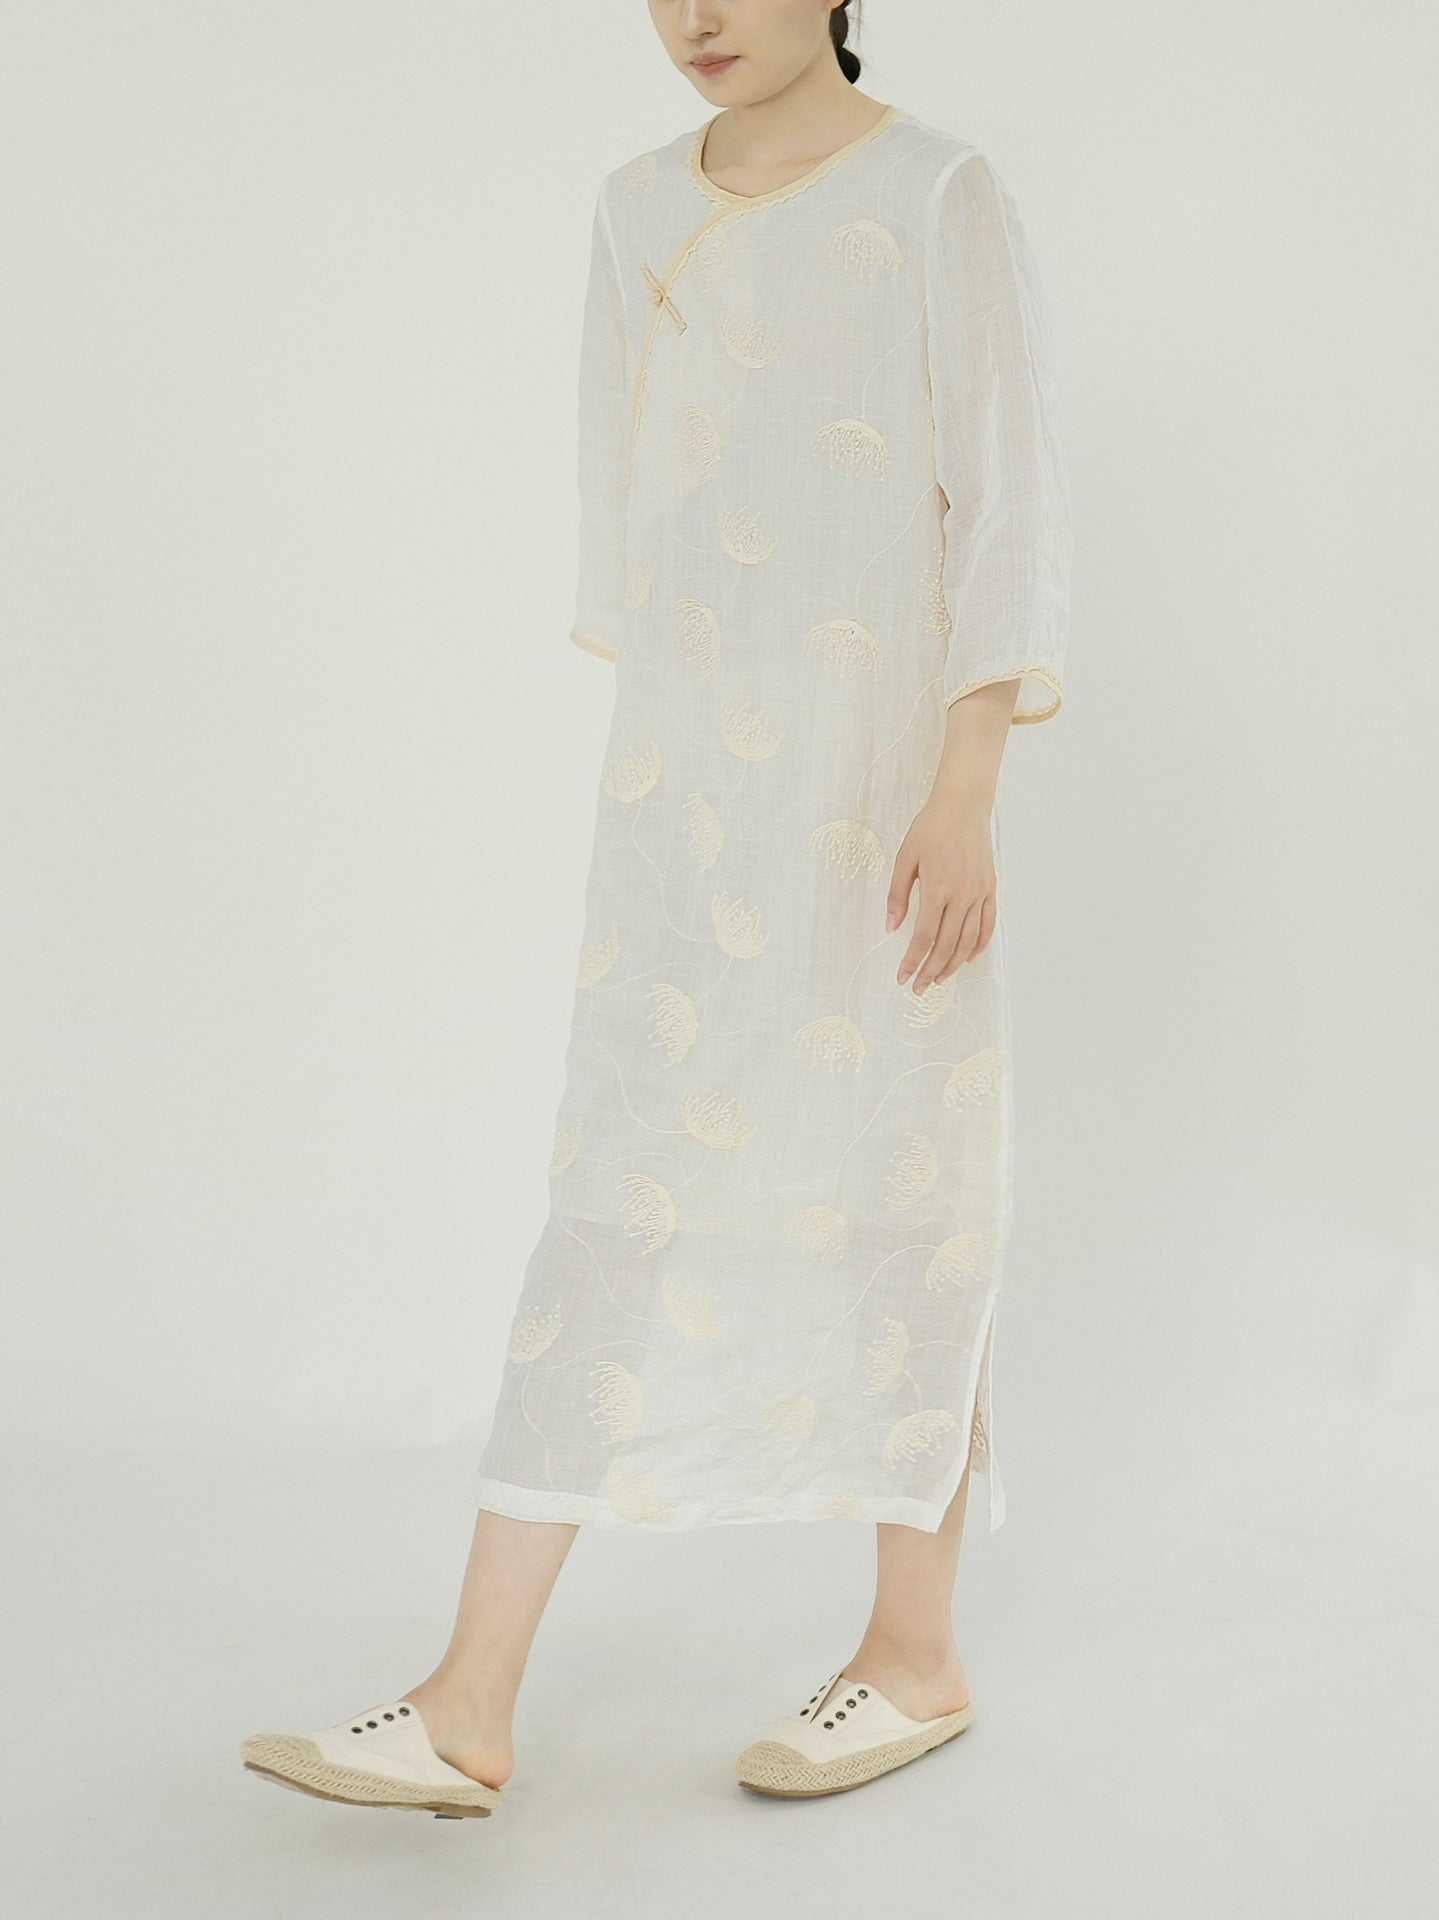 Embroidered Cheongsam Dress (3/4 Sleeve) in Off White